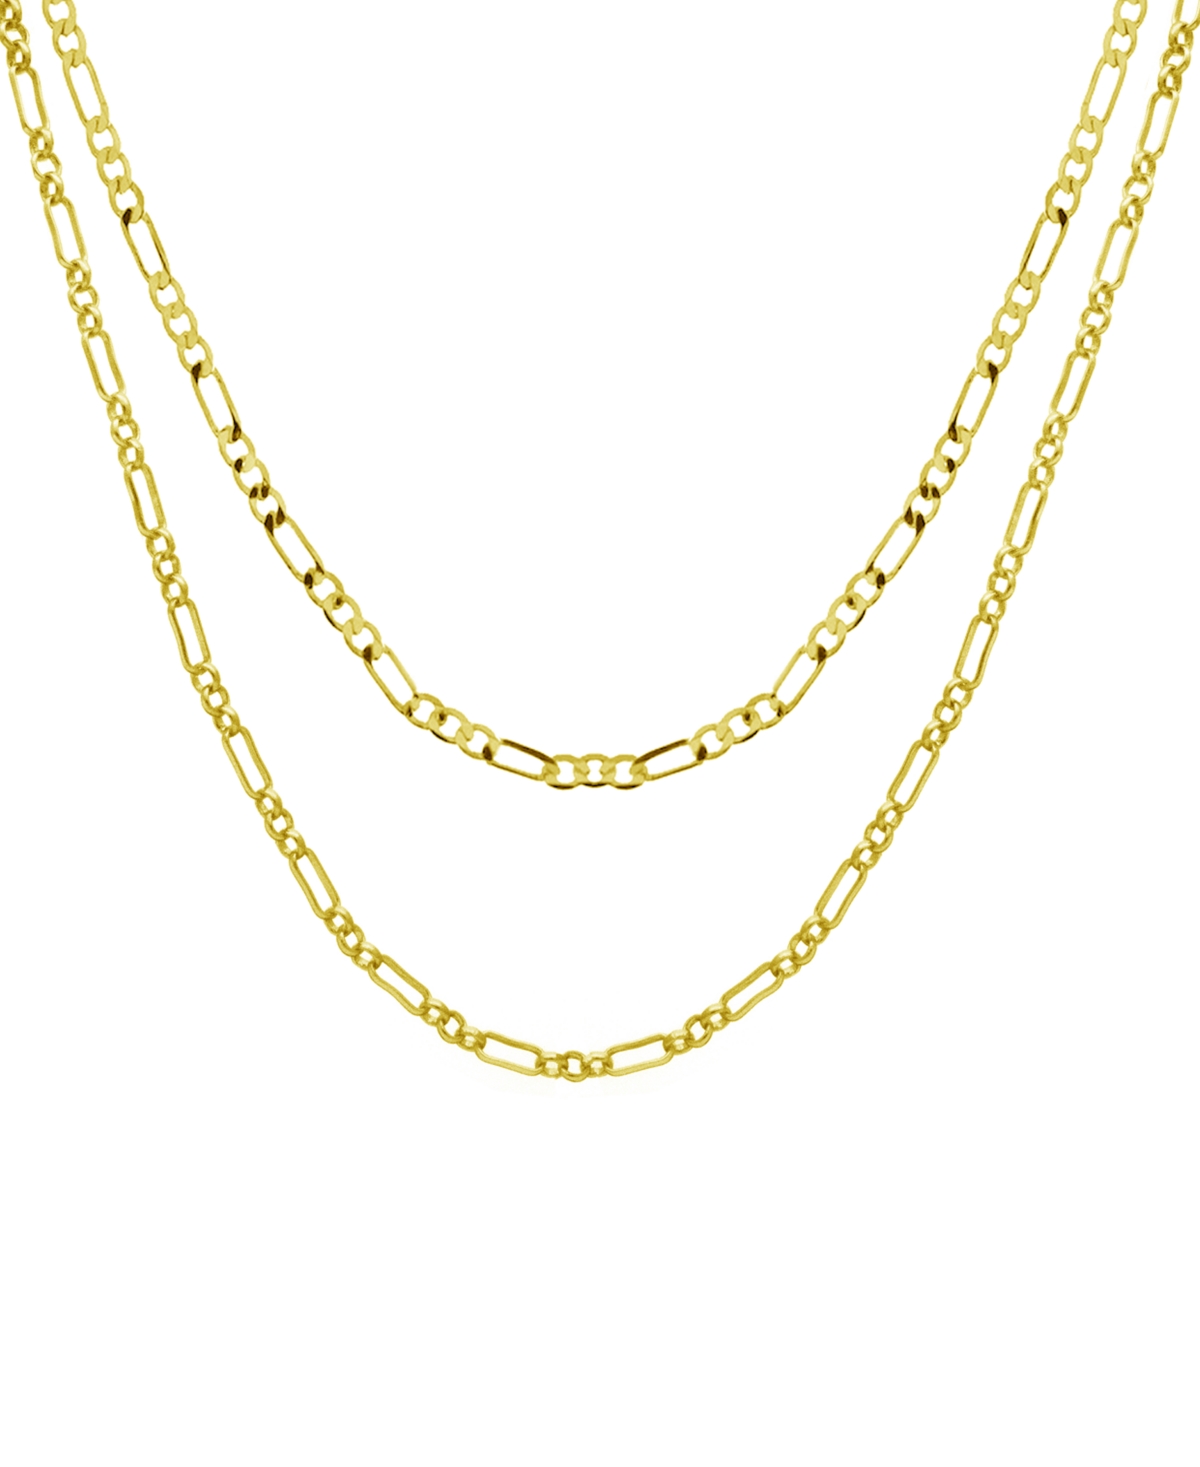 15.25" and 17.5" + 2" extender Silver Plated or Two-Tone Multi-Chain Layered Necklace - Silver Plated